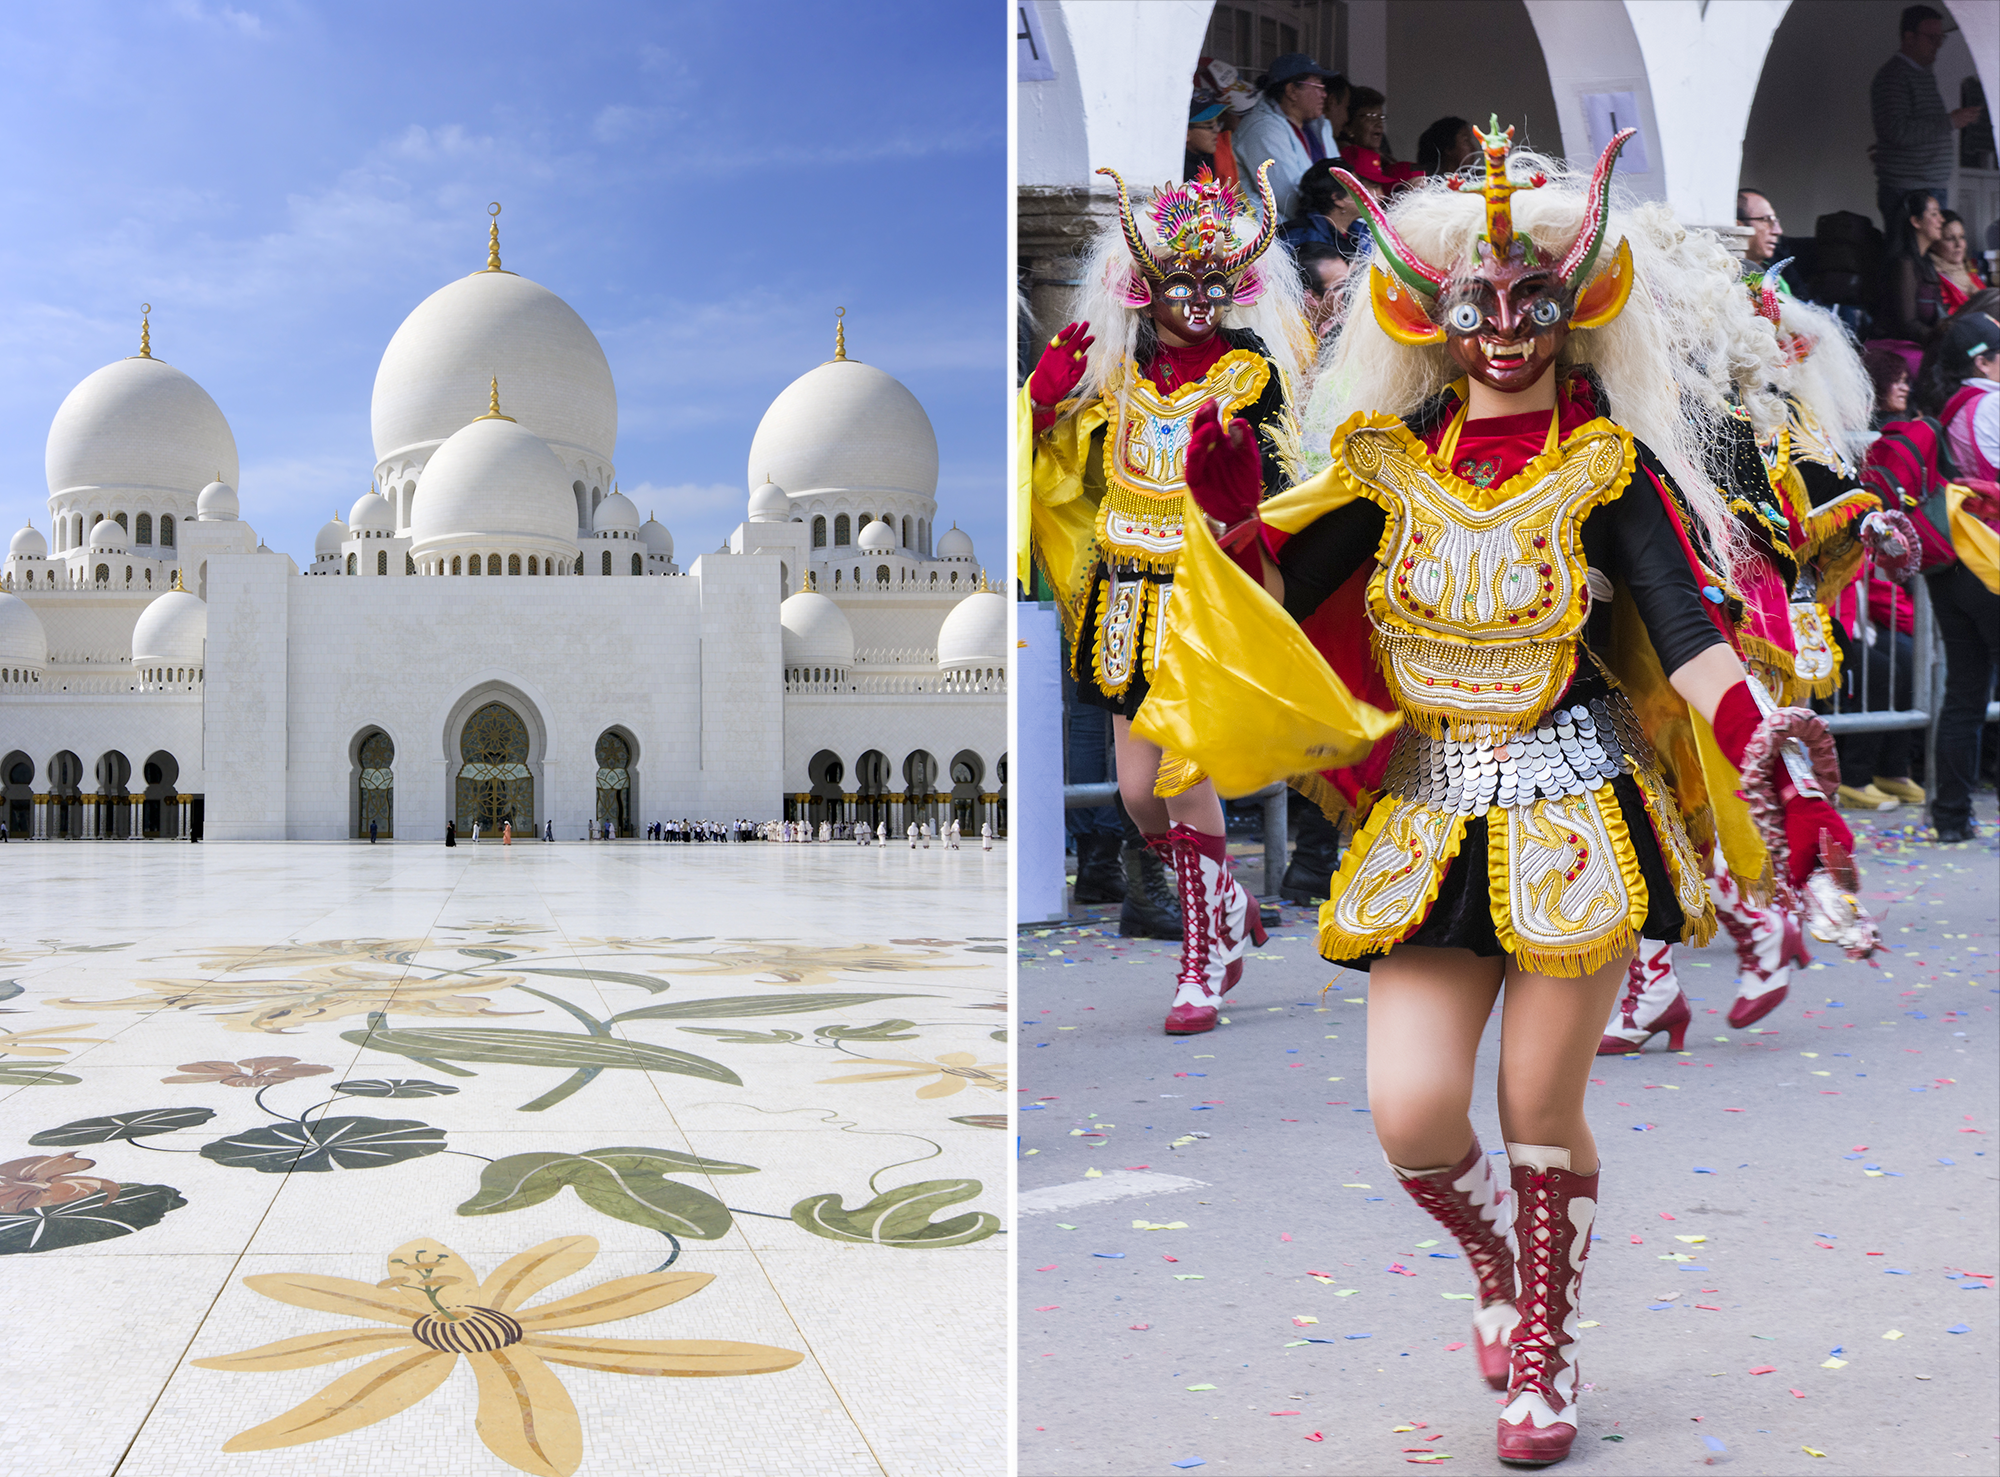 Sheikh Zayed Grand Mosque in Abu Dhabi and Dancer with Diablada mask in Bolivia 